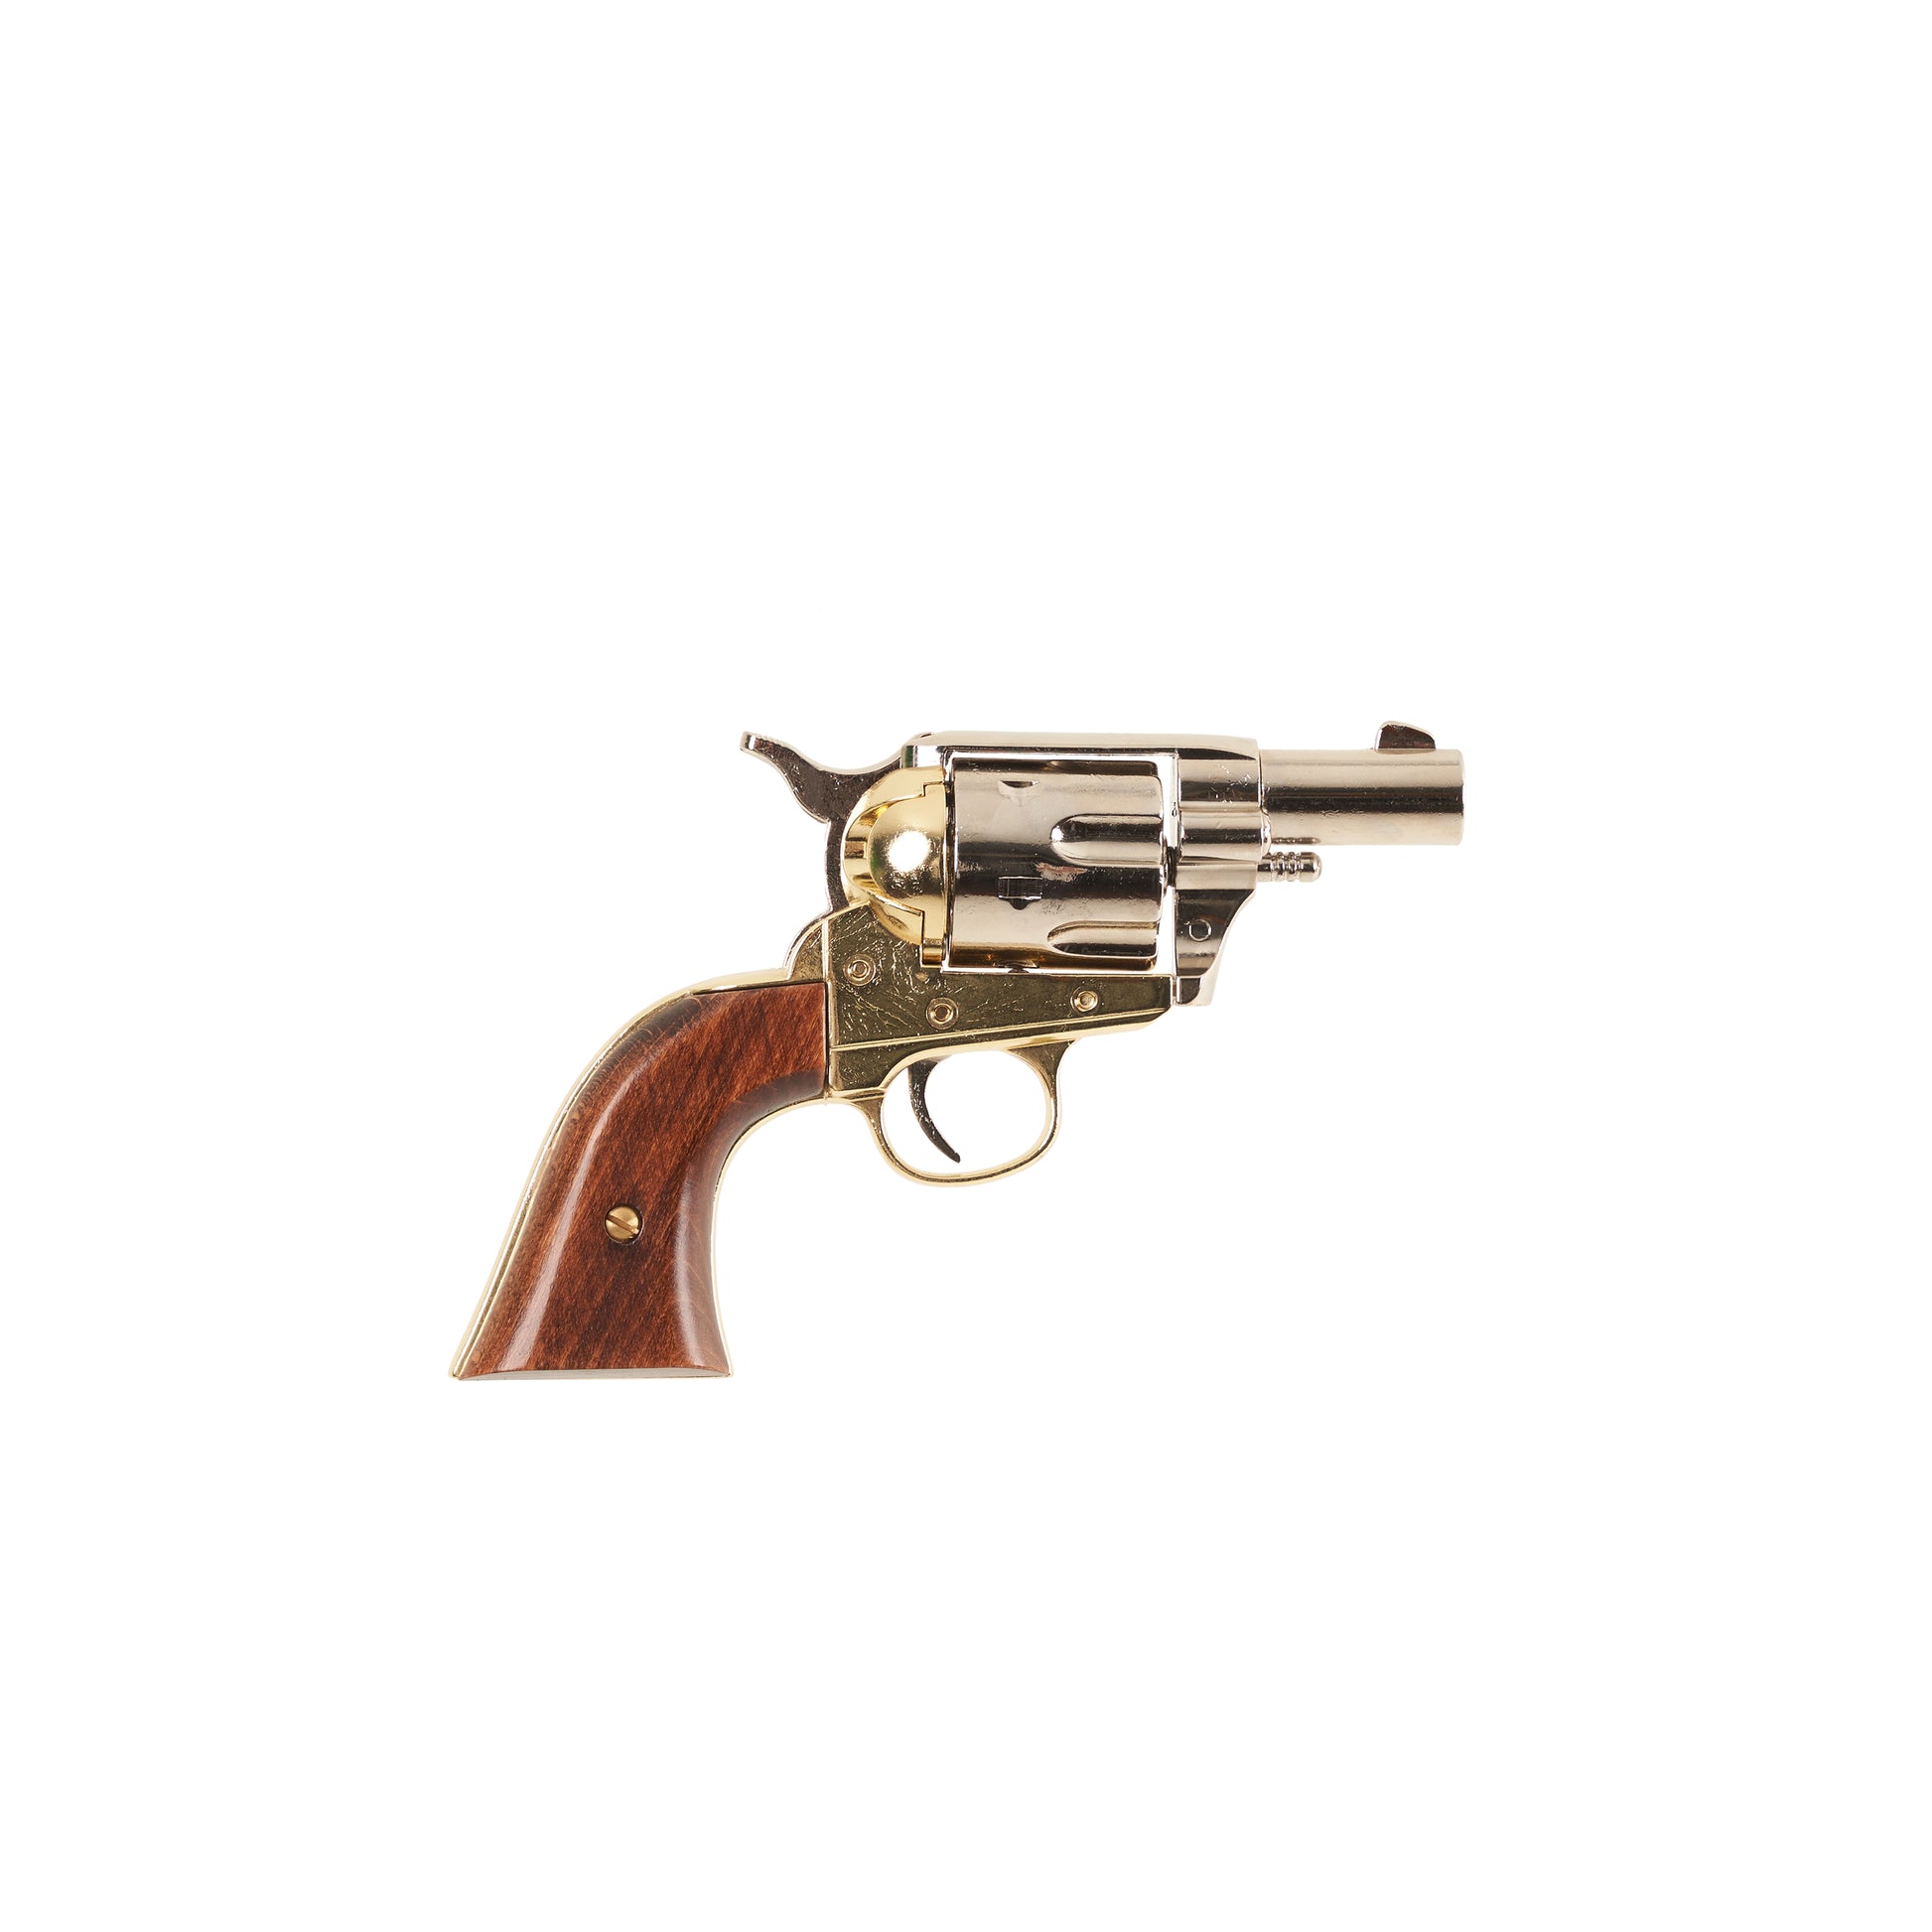 Right side view of polished nickel Non-Firing 1873 .45 Caliber Short Revolver with brass trigger guard and accents and wood grip.